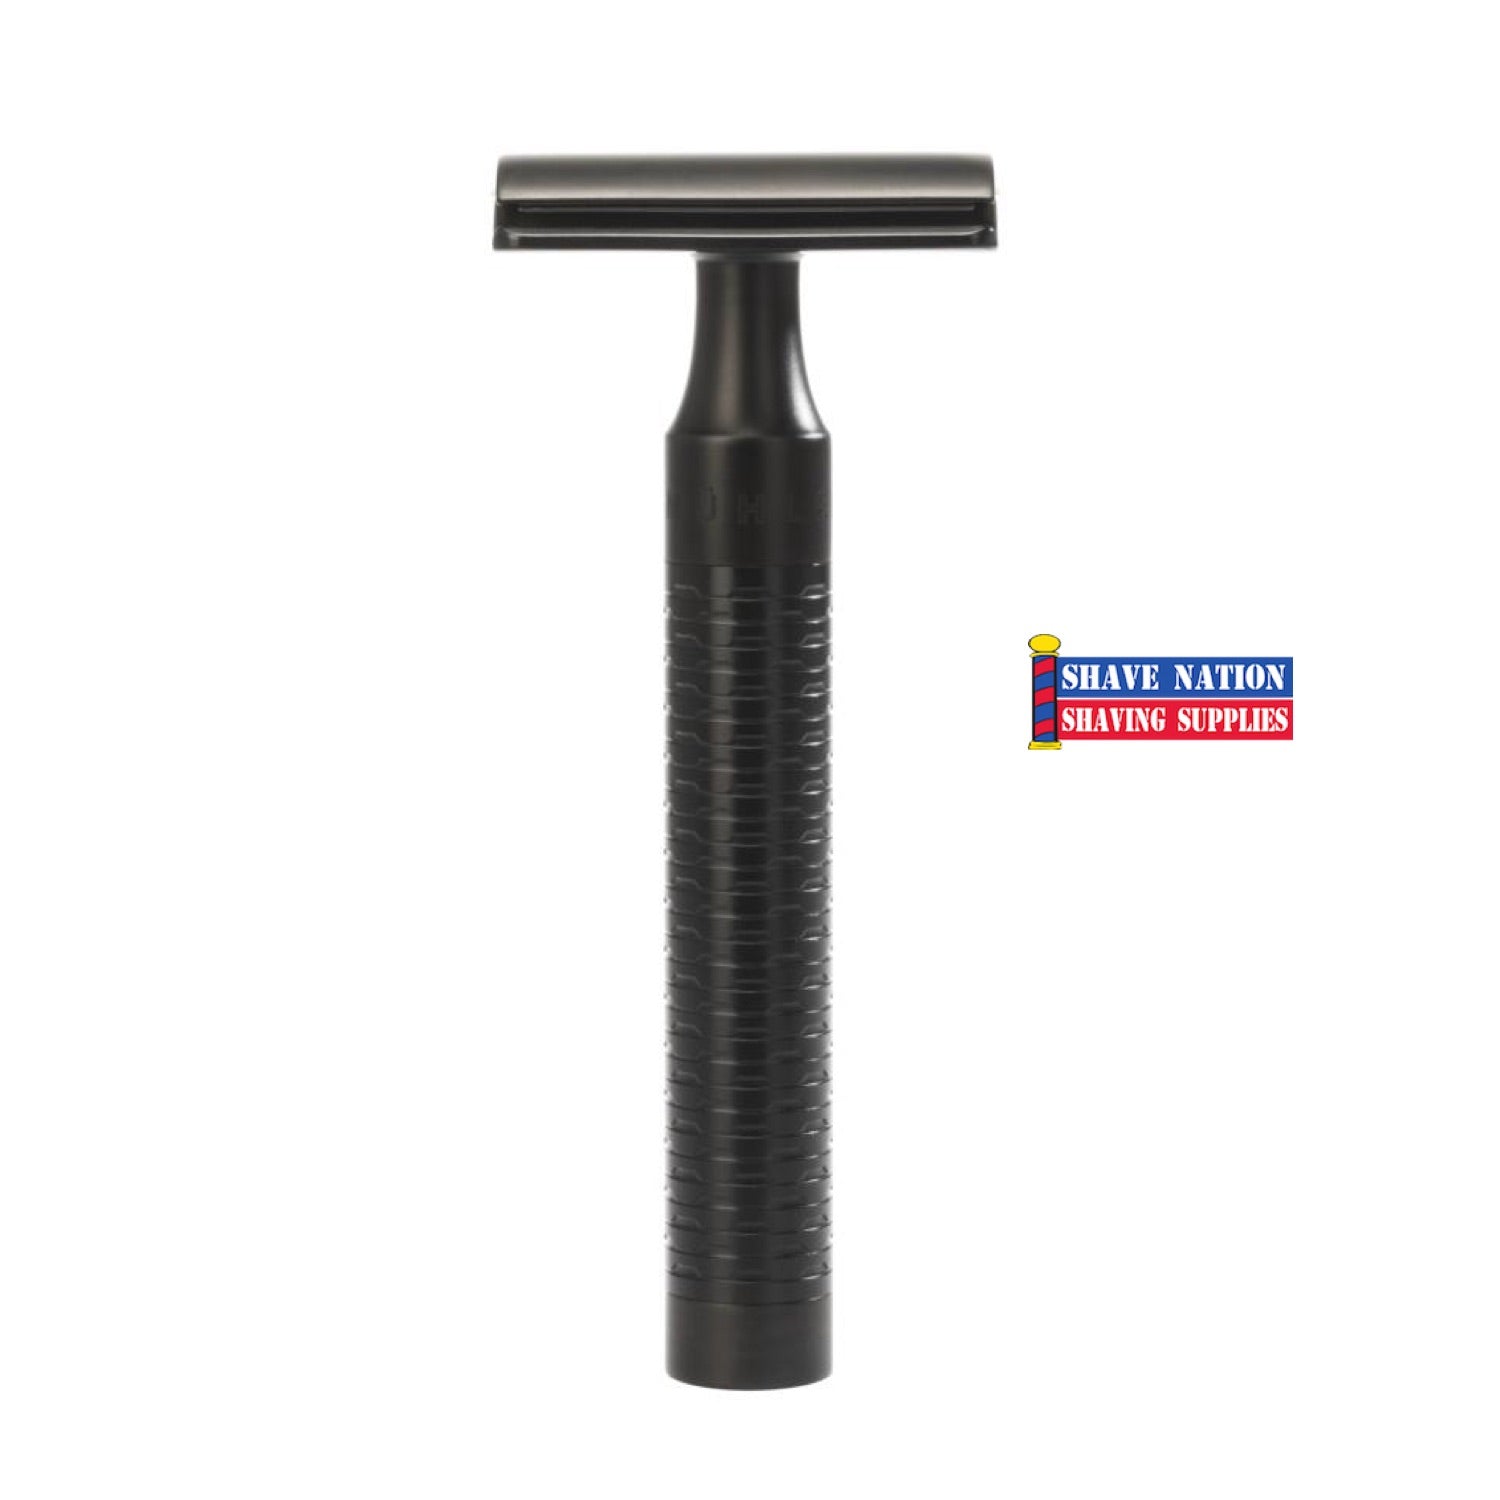 Muhle Rocca R96 JET Black Closed Comb Stainless Steel Safety Razor